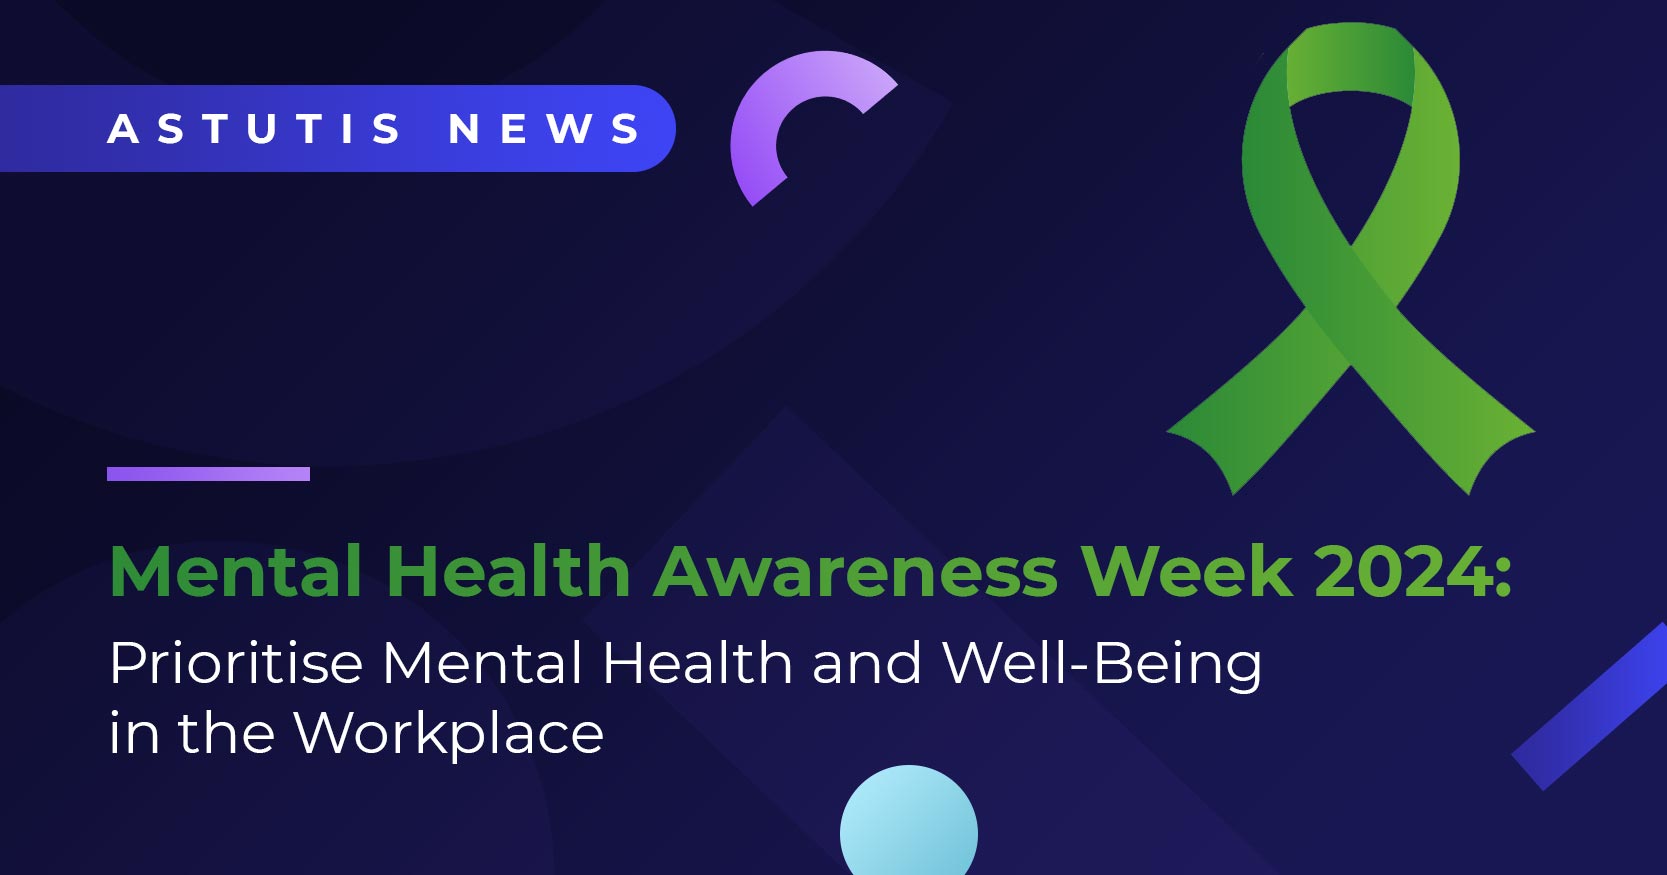 Prioritise Mental Health and Wellbeing in the Workplace: Mental Health Awareness Week 2024 Image